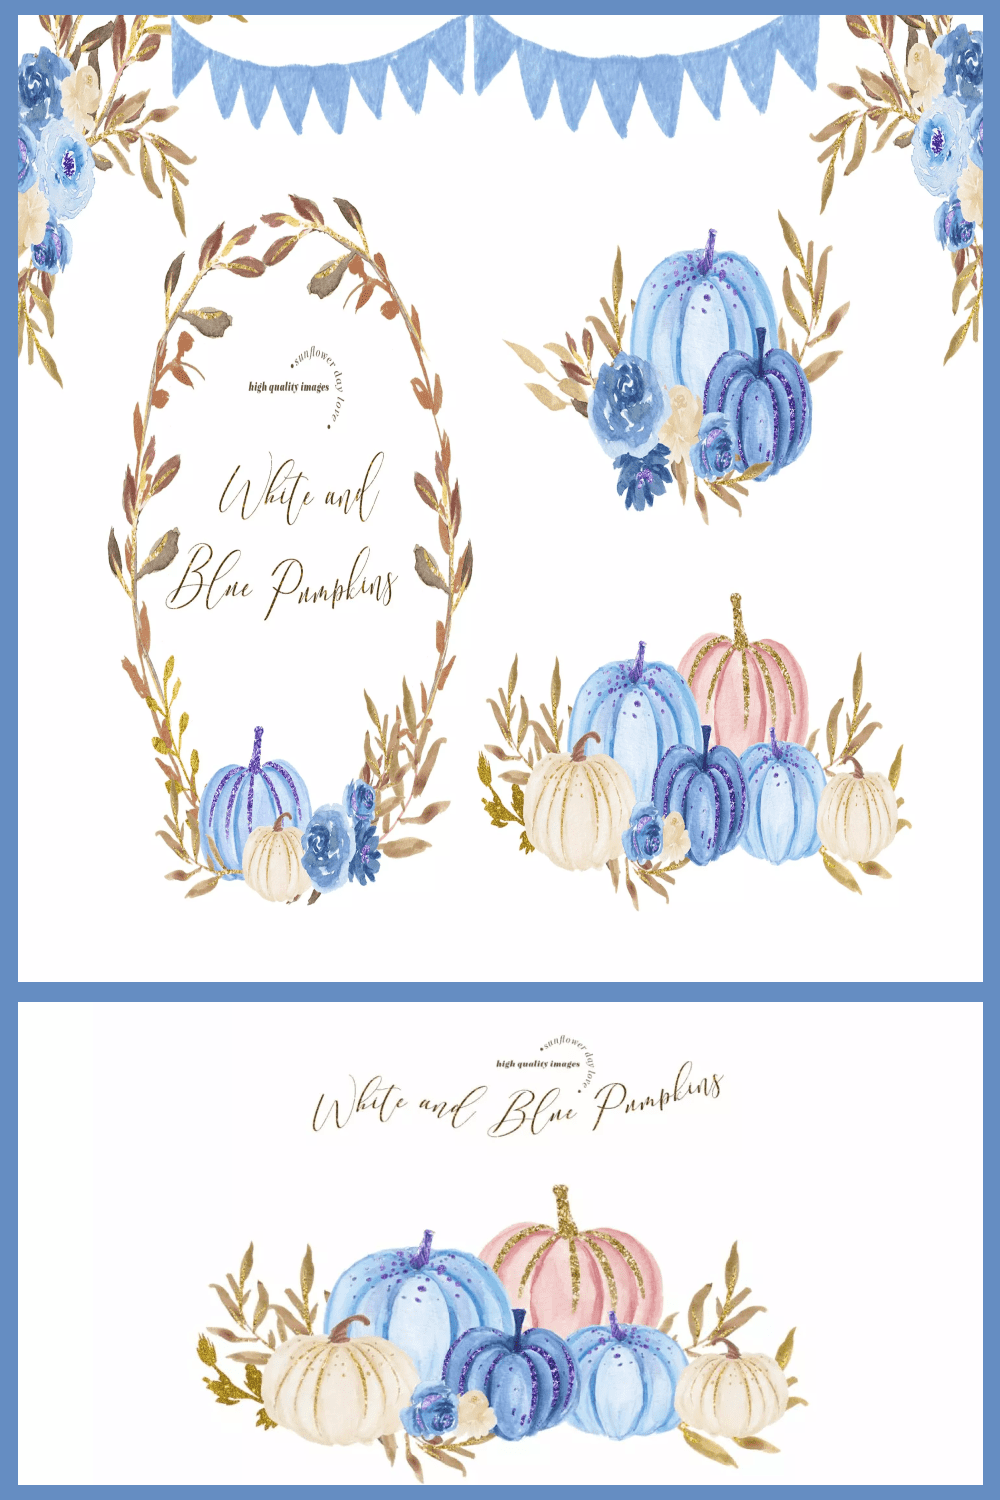 Collage with images of blue, pink and beige pumpkins.